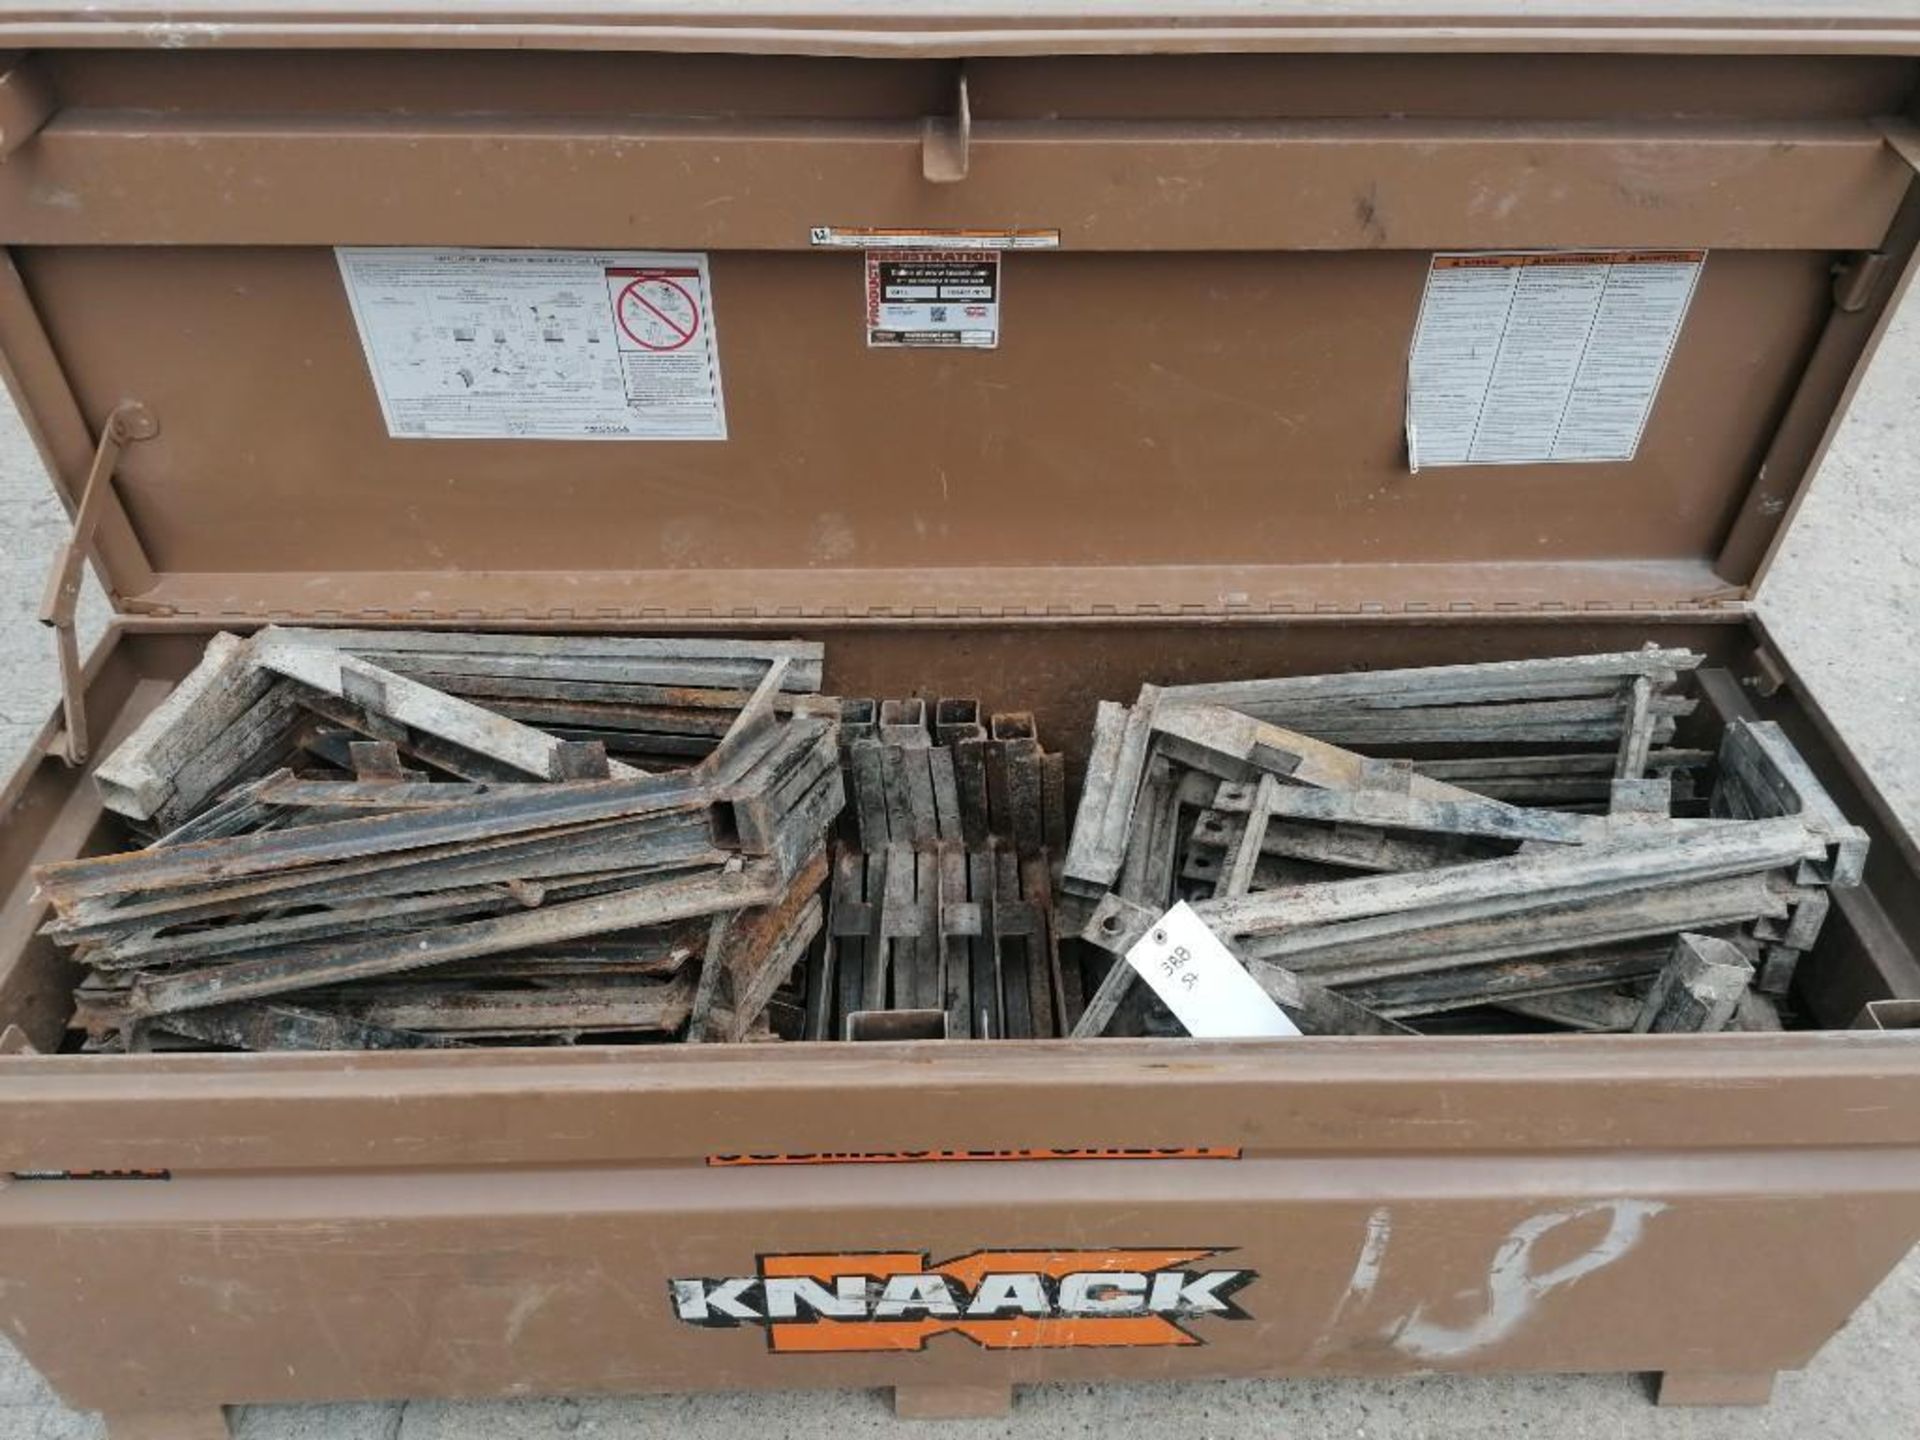 KNAACK Job Box Model 2472 with (57) Scaffolding brackets. Located at 301 E Henry Street, Mt. - Image 3 of 4